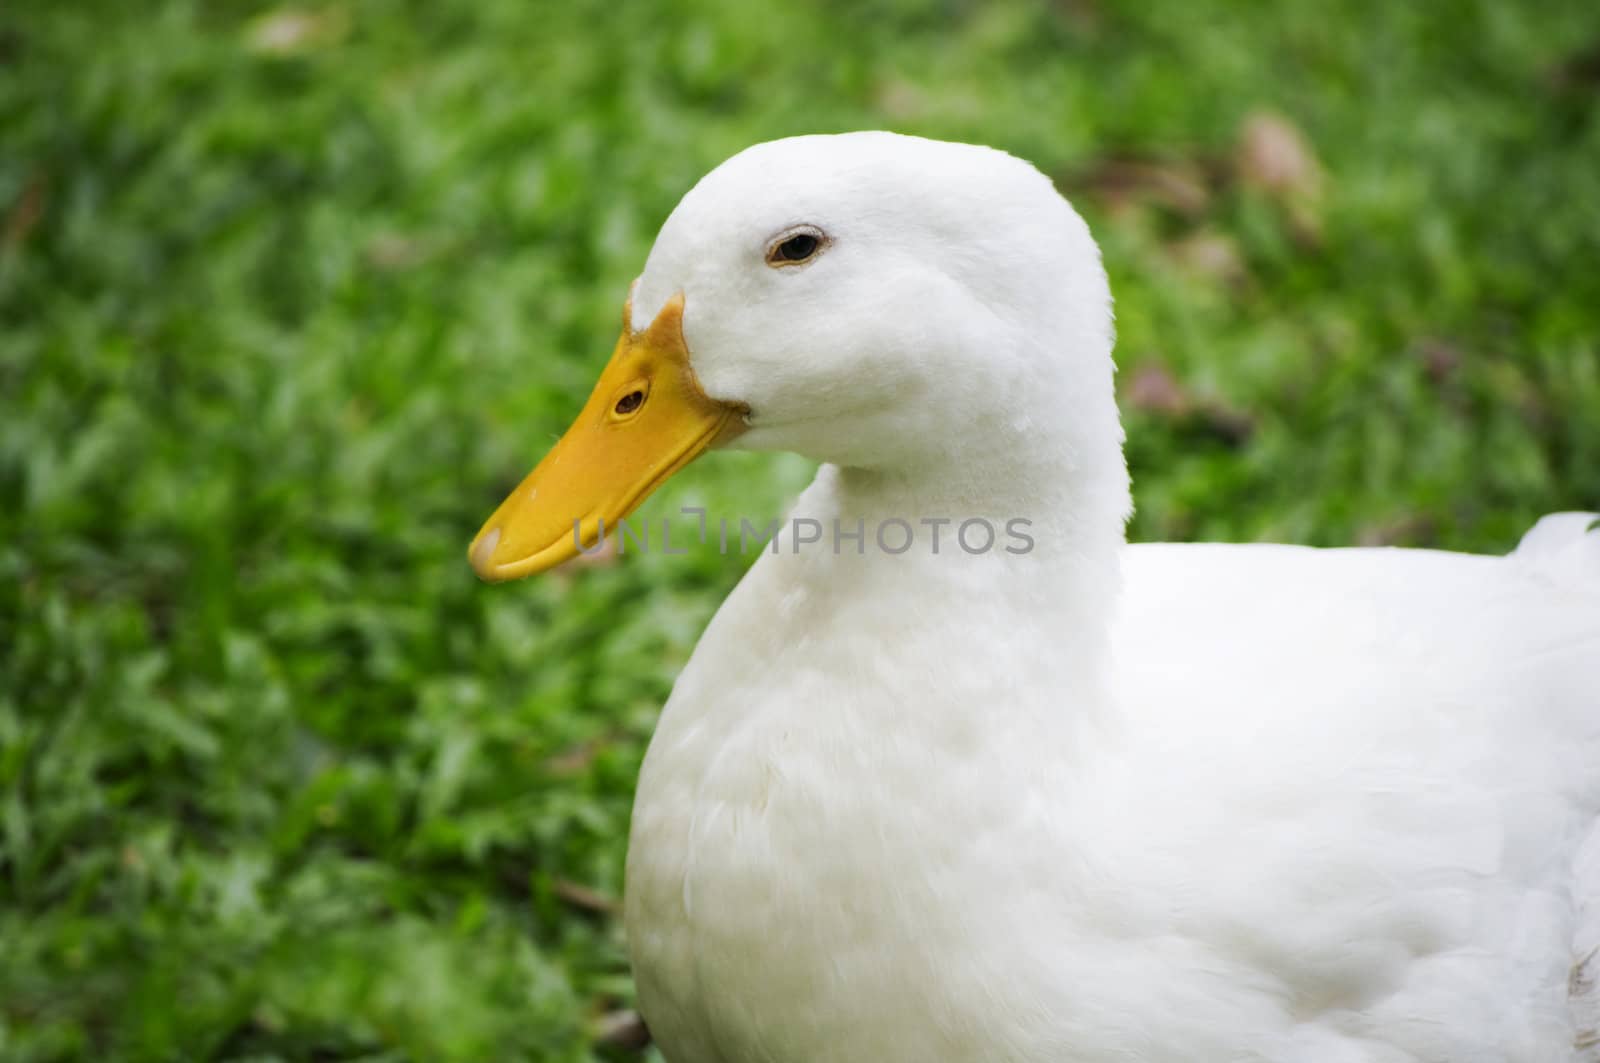 White duck on a green lawn 